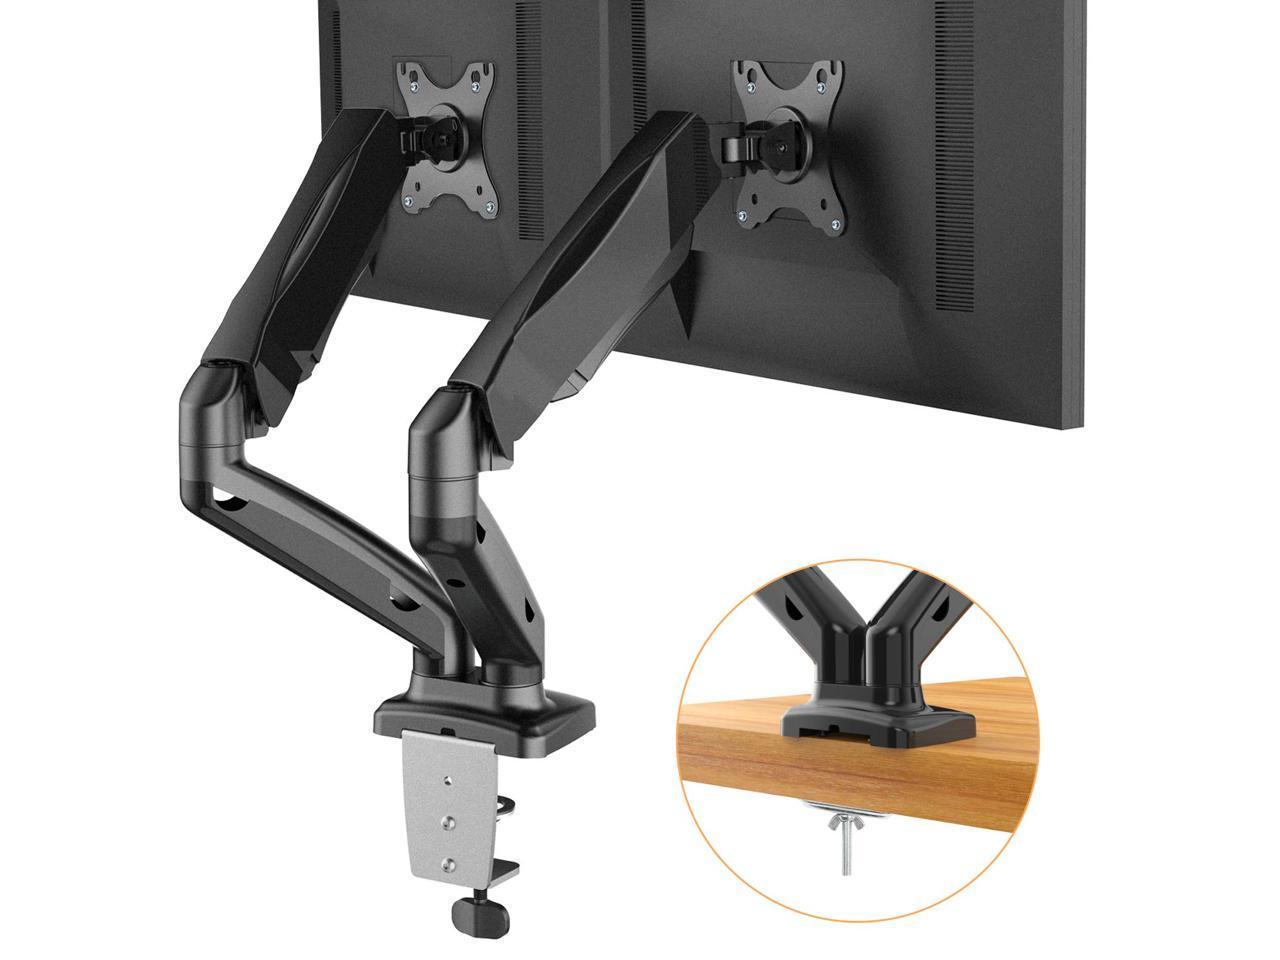 Huanuo Dual Monitor Stand w/ Adjustable Gas Spring LCD Arms (for 13" - 27" monitors/screens) + $5 Newegg Promotional Gift Card $35 + Free Shipping